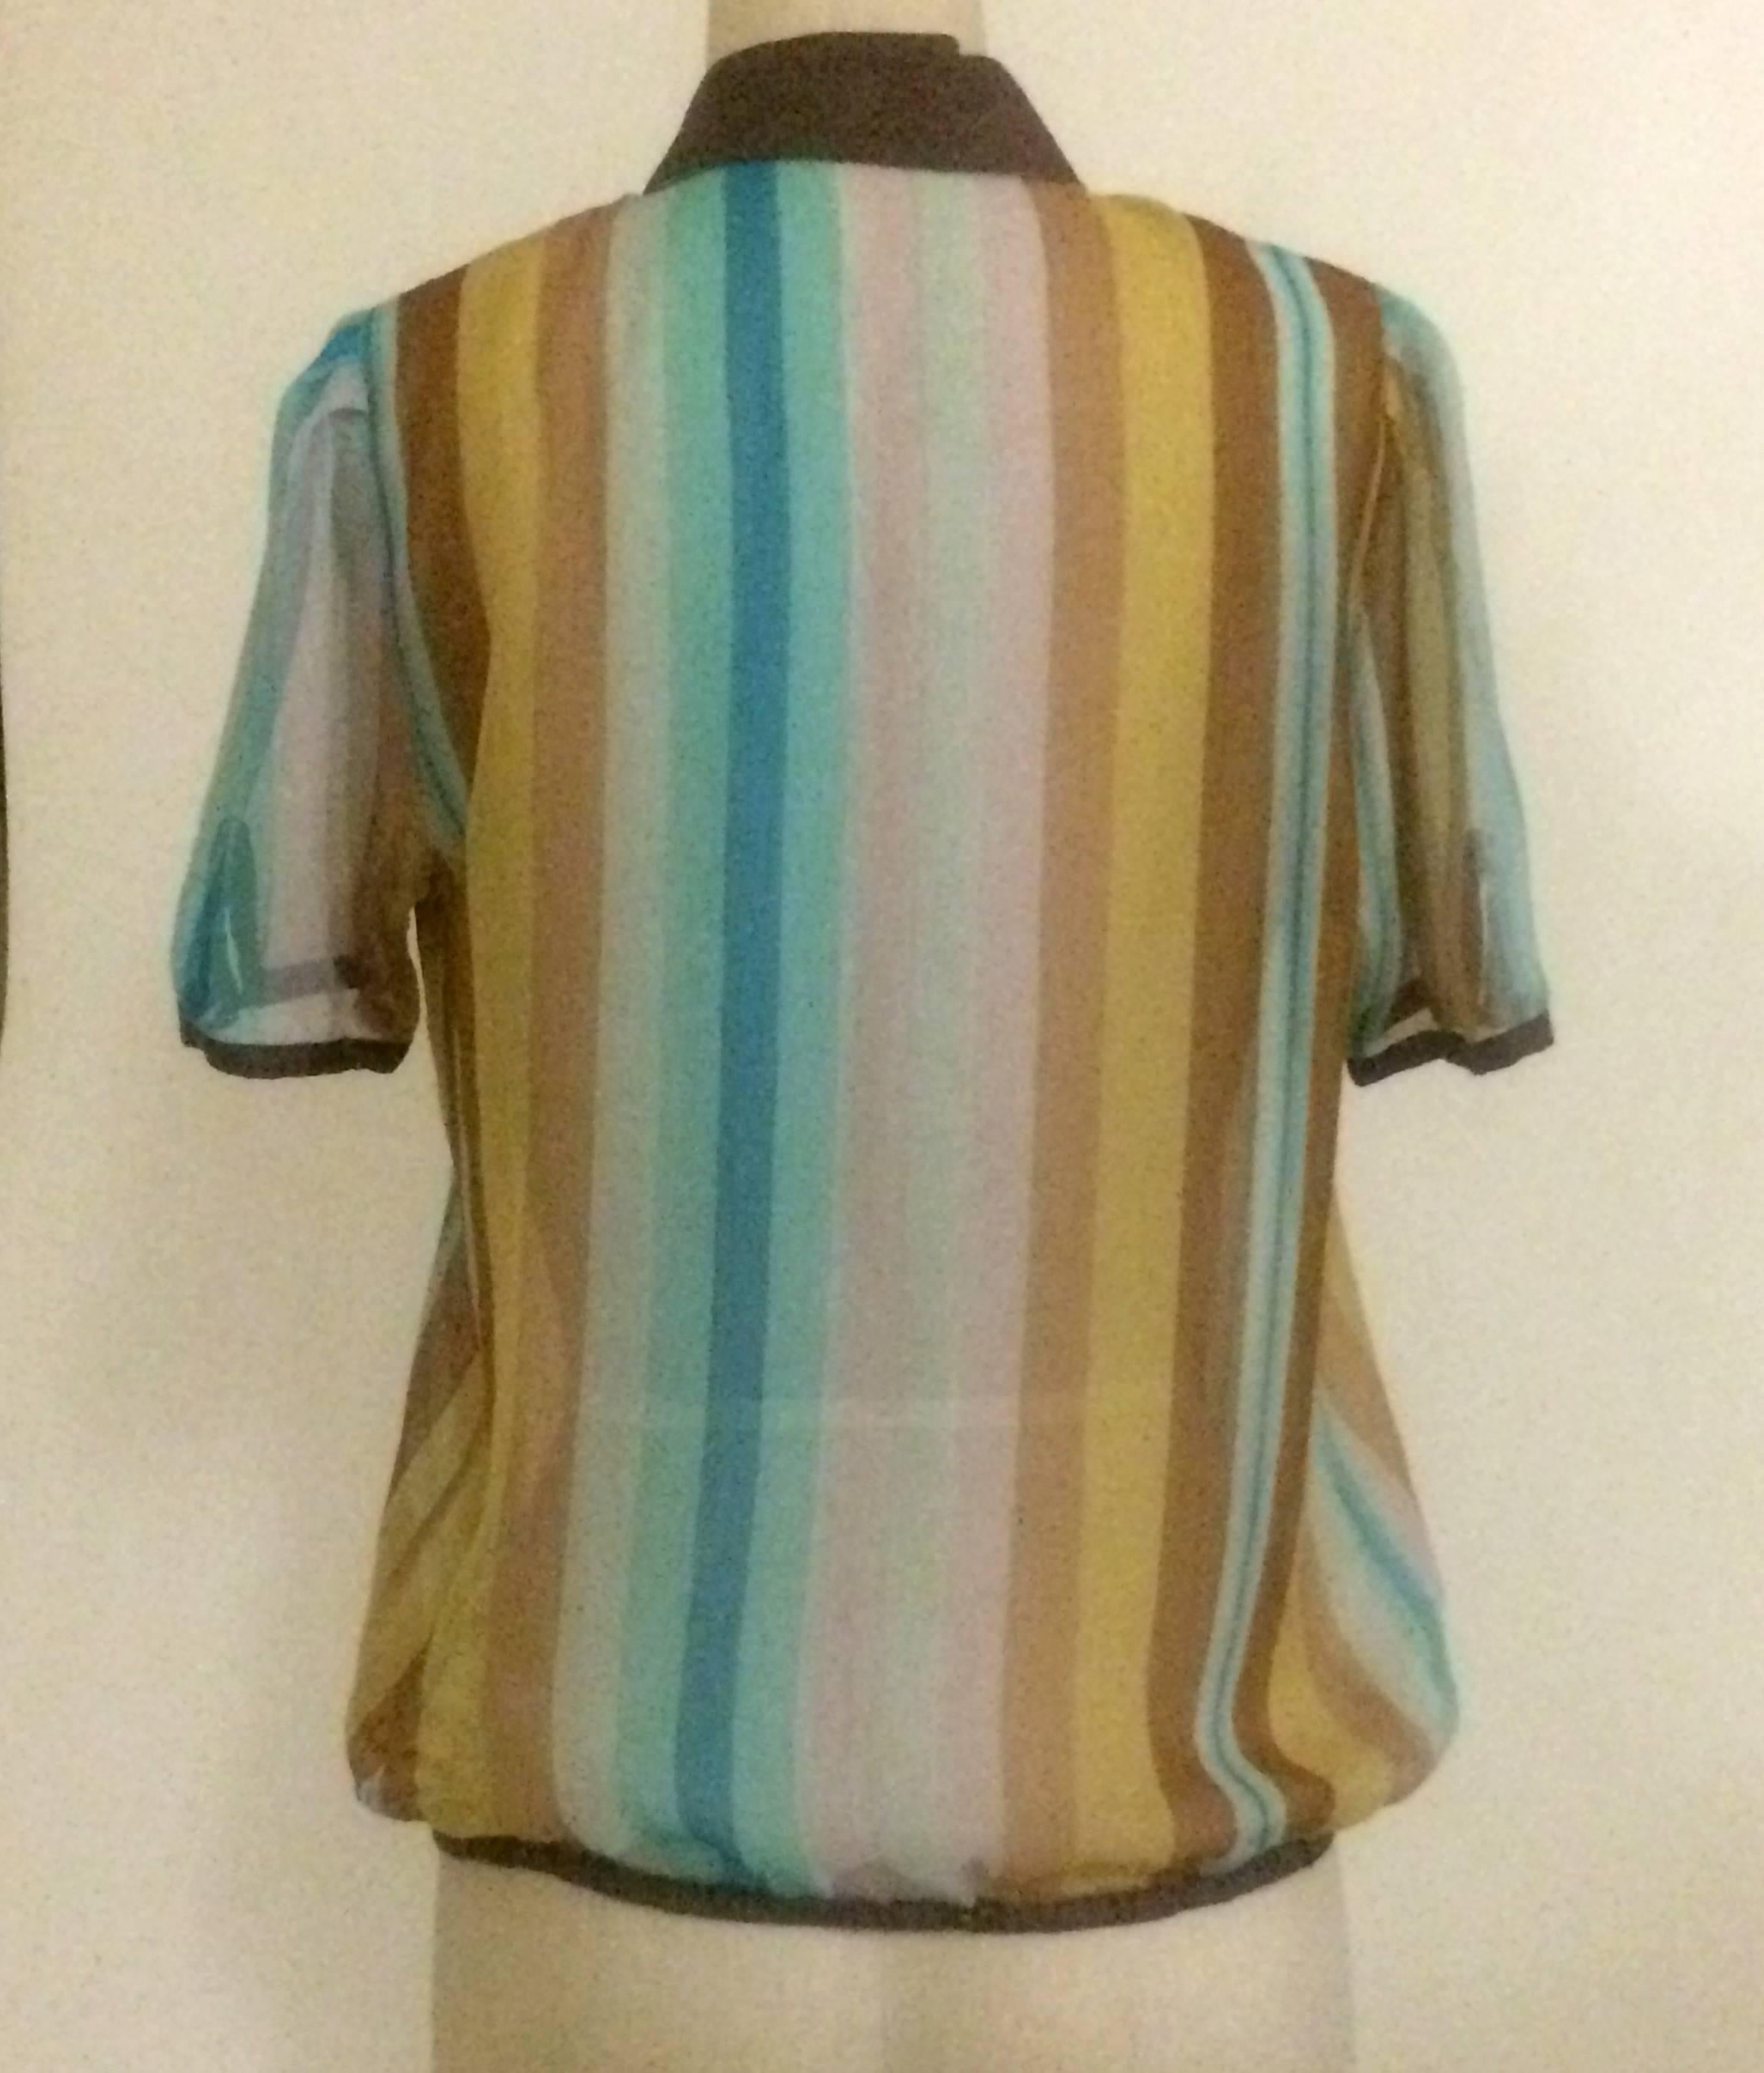 Christian Dior vintage semi-sheer multi color striped blouse with brown trim. Extra long keyhole at front, or can be worn with collar unbuttoned for a more laid back look. Cute with jeans, or makes a lovely beach cover over a chocolate brown